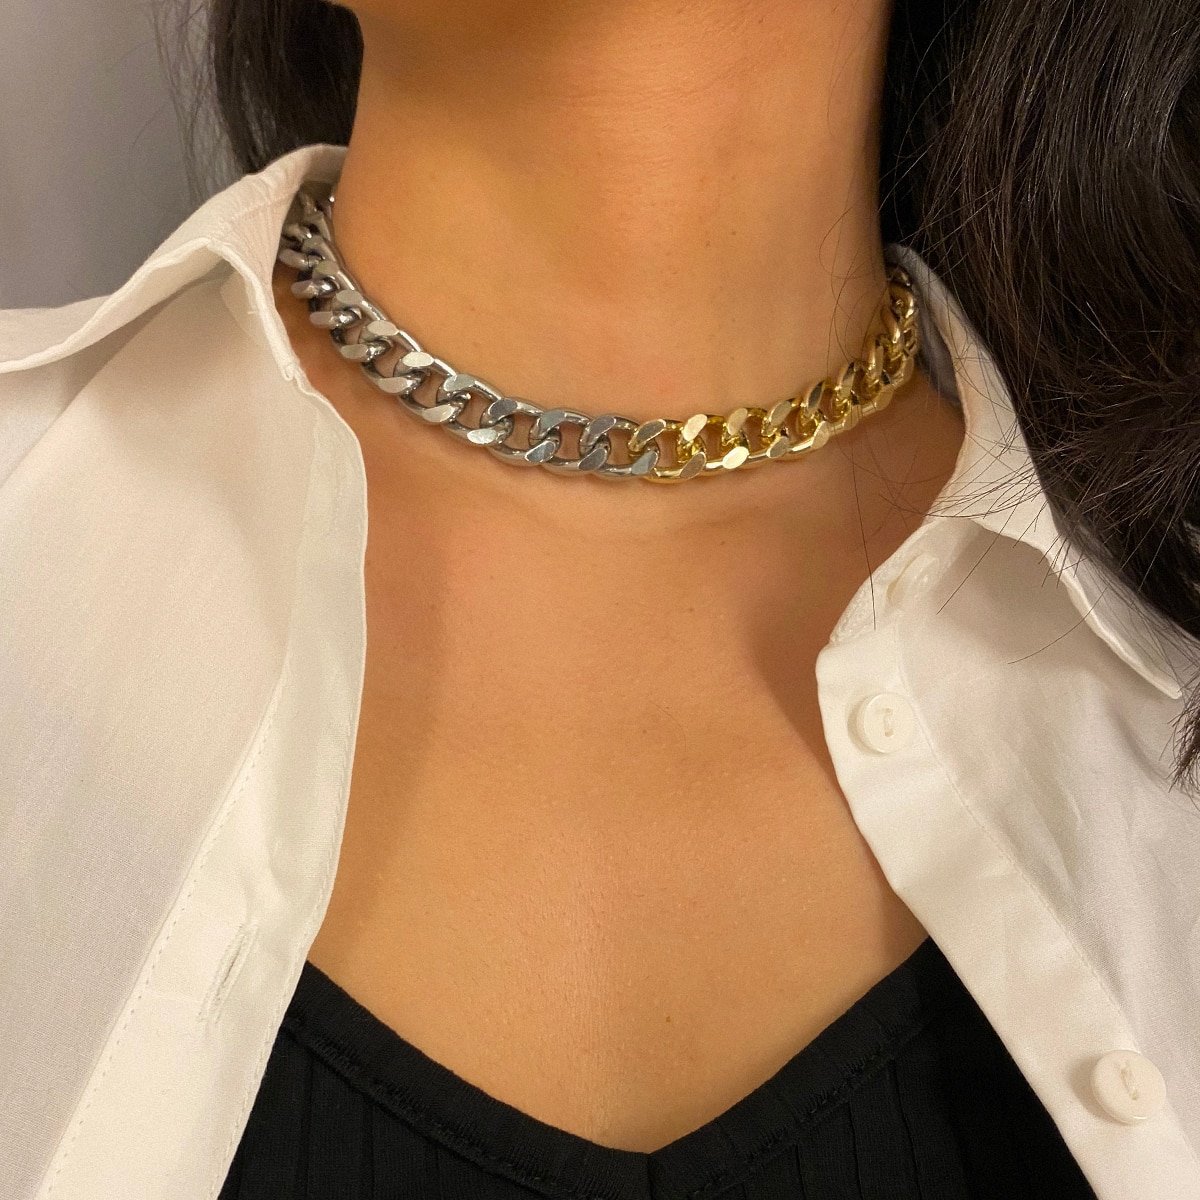 A woman wearing a Stylish Women's Thick Gold Chain Necklace.